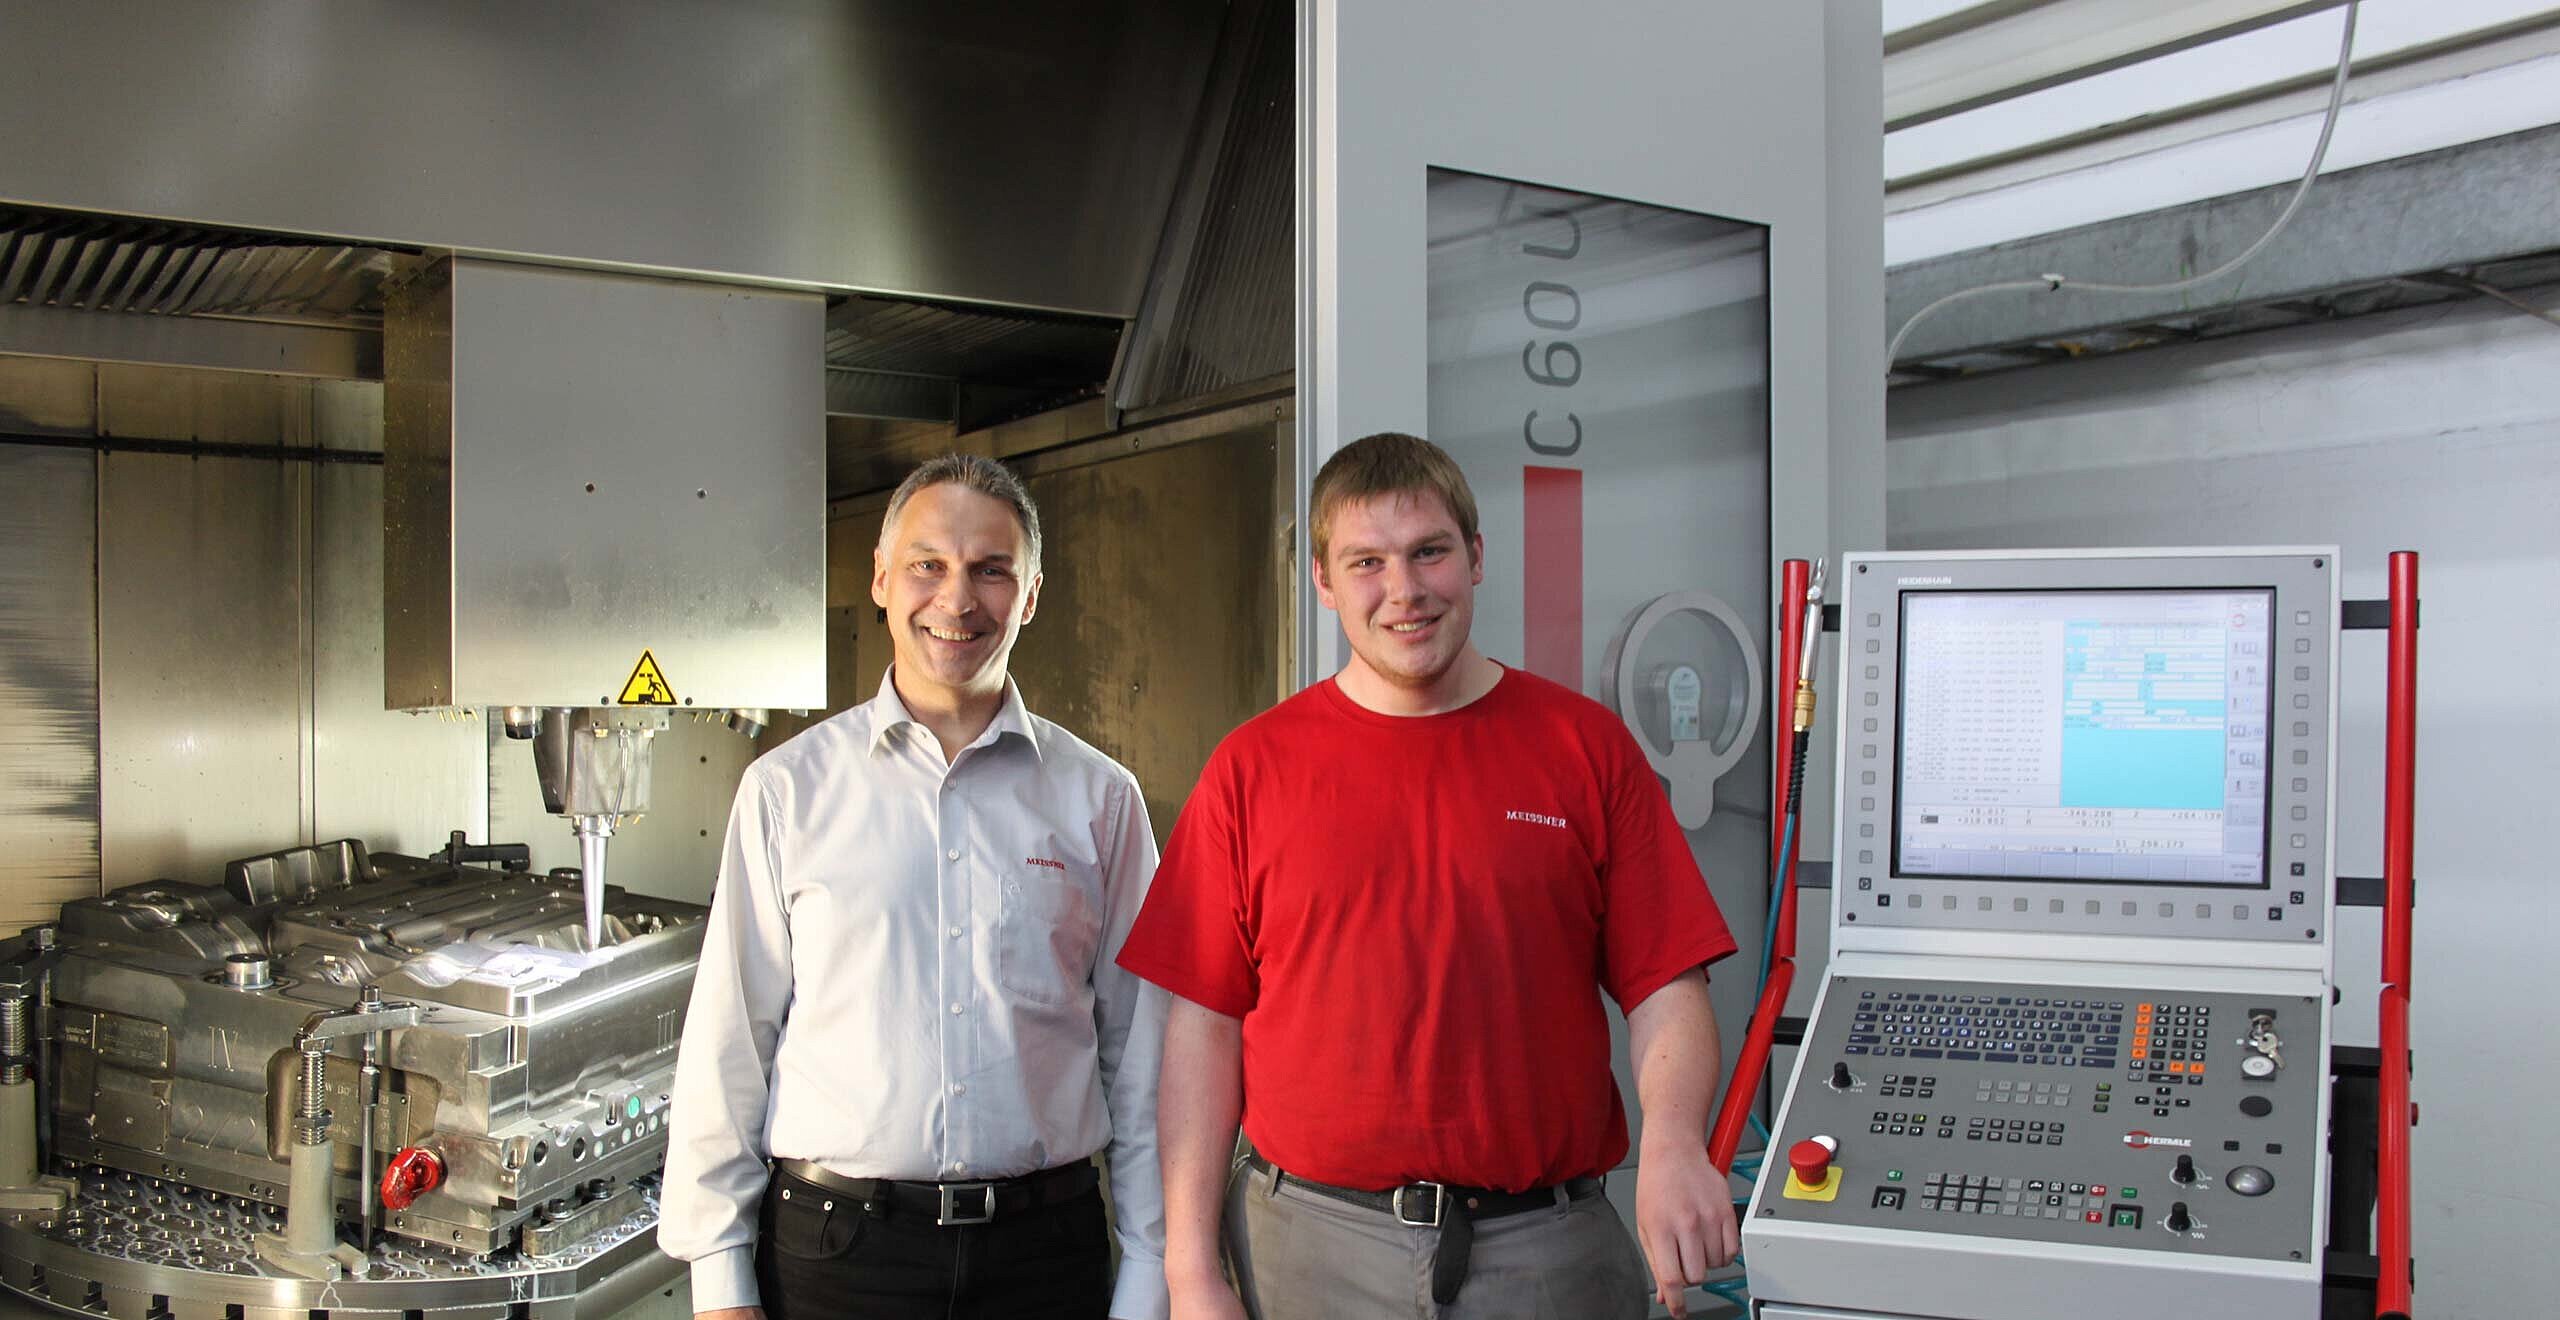 Reinhard Hackler, Director of Mechanical Manufacturing and Lukas Garthe, Cutting Machine Operator, in front of "his" Hermle C 60 U 5-axis CNC high performance machining centre with Heidenhain control iTNC 530 HSCI